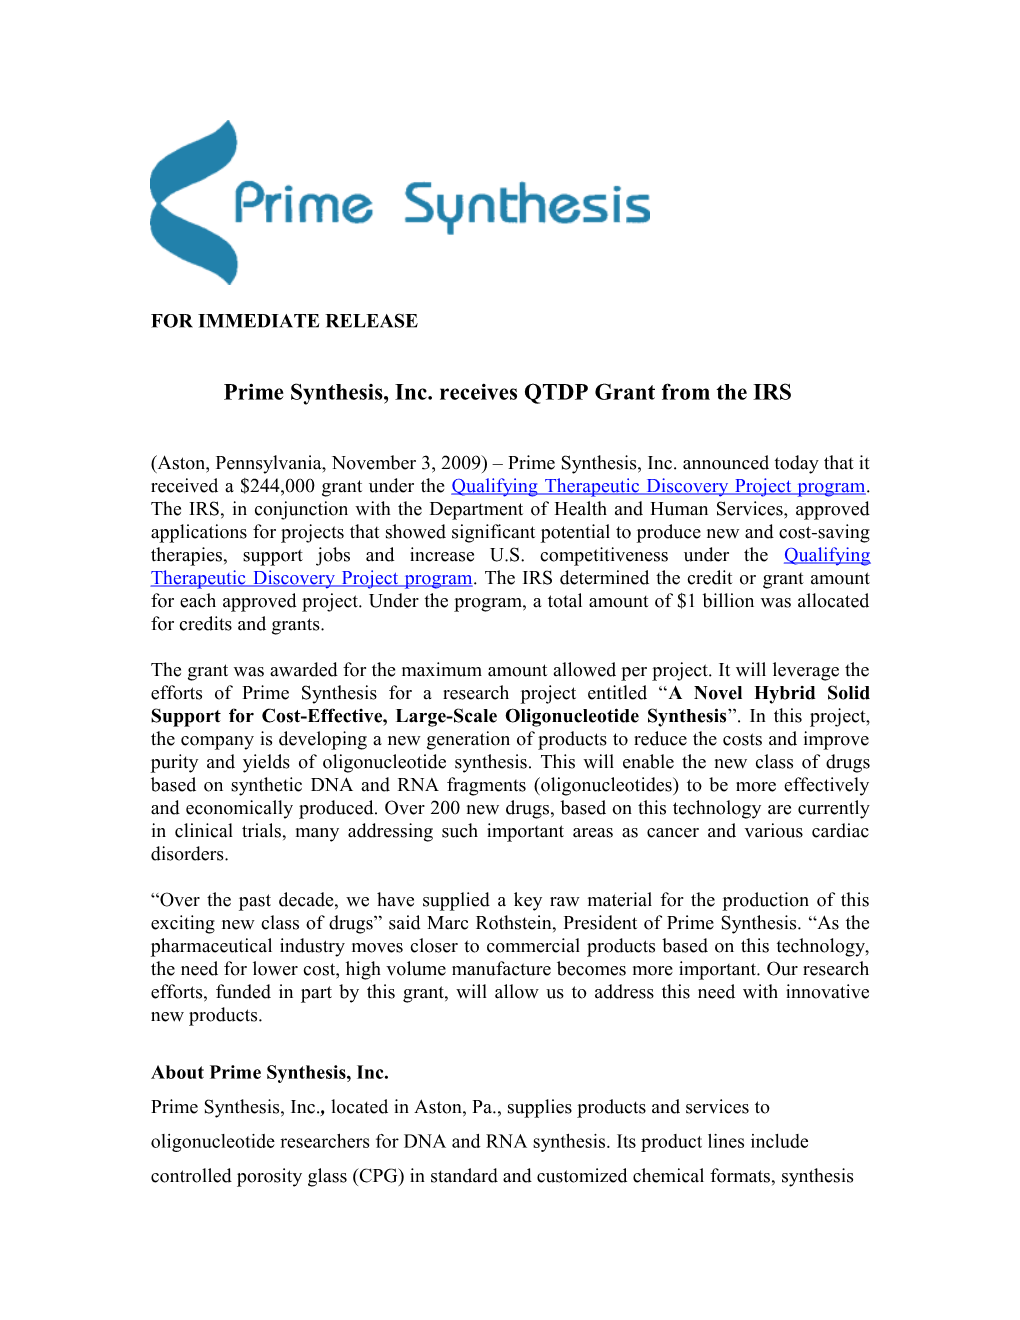 Prime Synthesis, Inc. Receives QTDP Grant from Theirs